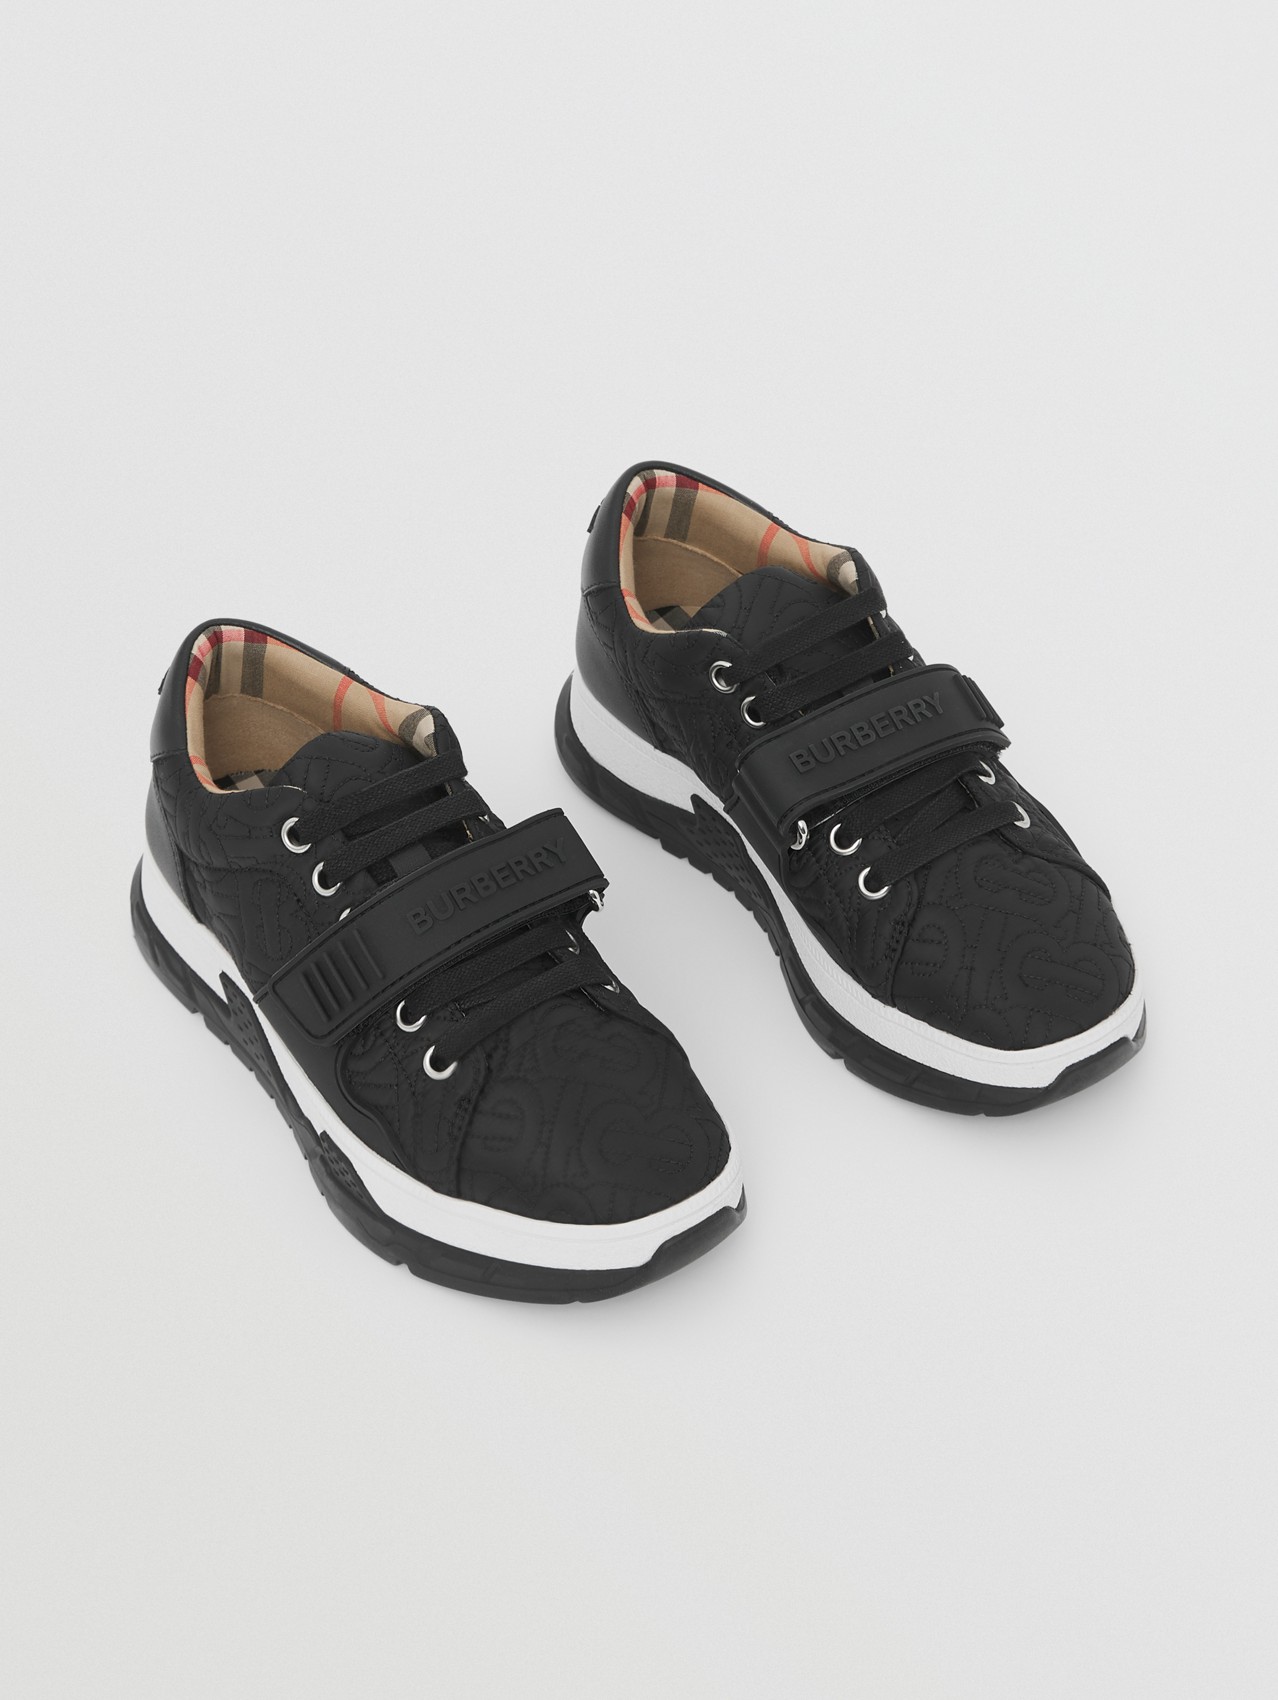 Monogram Recycled Polyester and Leather Sneakers in Black